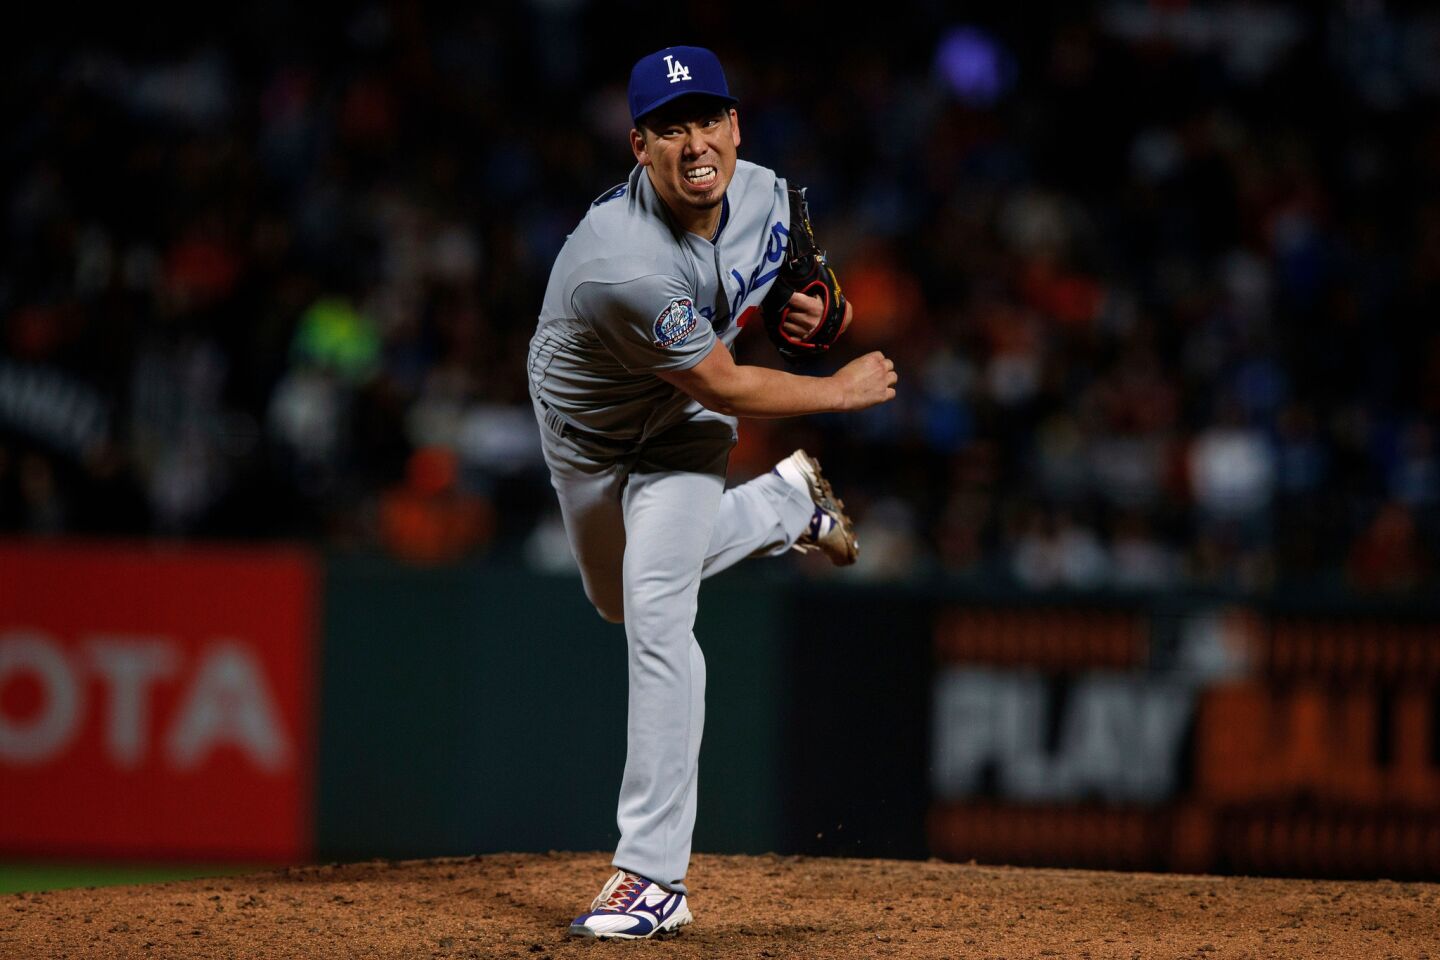 SAN FRANCISCO, CA - SEPTEMBER 28: Kenta Maeda #18 of the Los Angeles Dodgers pitches against the San Francisco Giants during the eighth inning at AT&T Park on September 28, 2018 in San Francisco, California. The Los Angeles Dodgers defeated the San Francisco Giants 3-1. (Photo by Jason O. Watson/Getty Images) ** OUTS - ELSENT, FPG, CM - OUTS * NM, PH, VA if sourced by CT, LA or MoD **